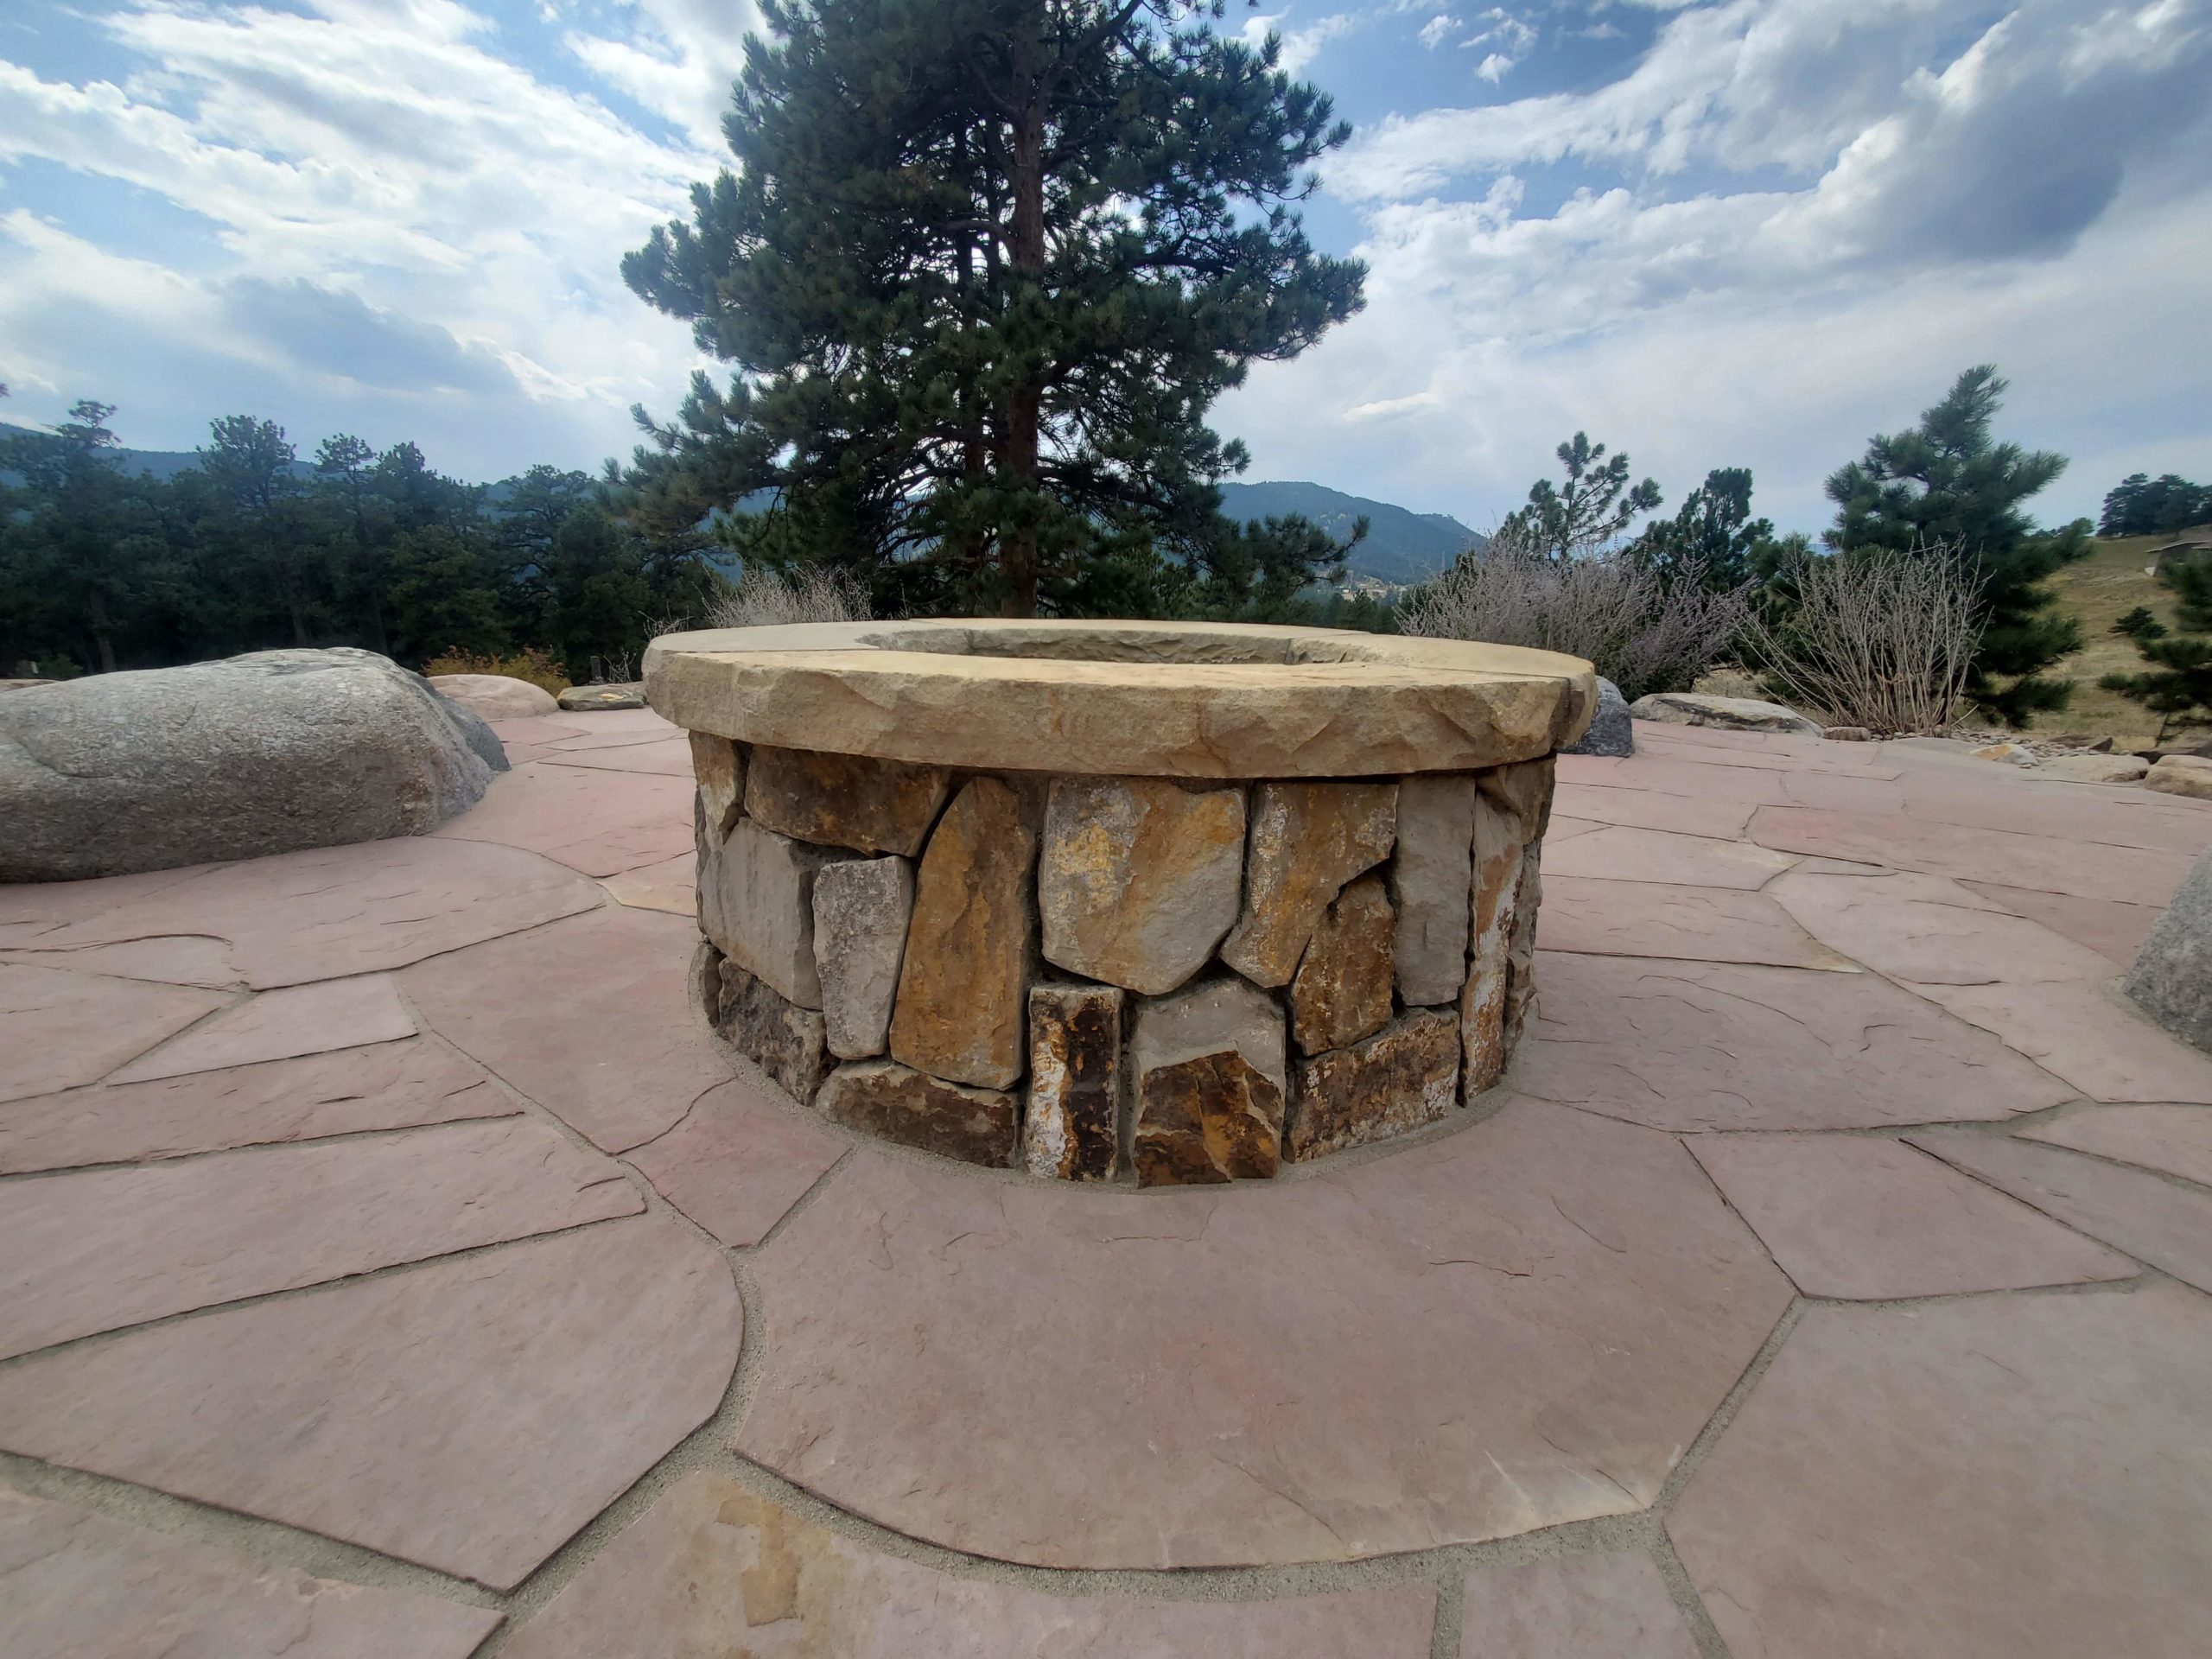 Close-up of stone fireplace with large river rock seating nearby